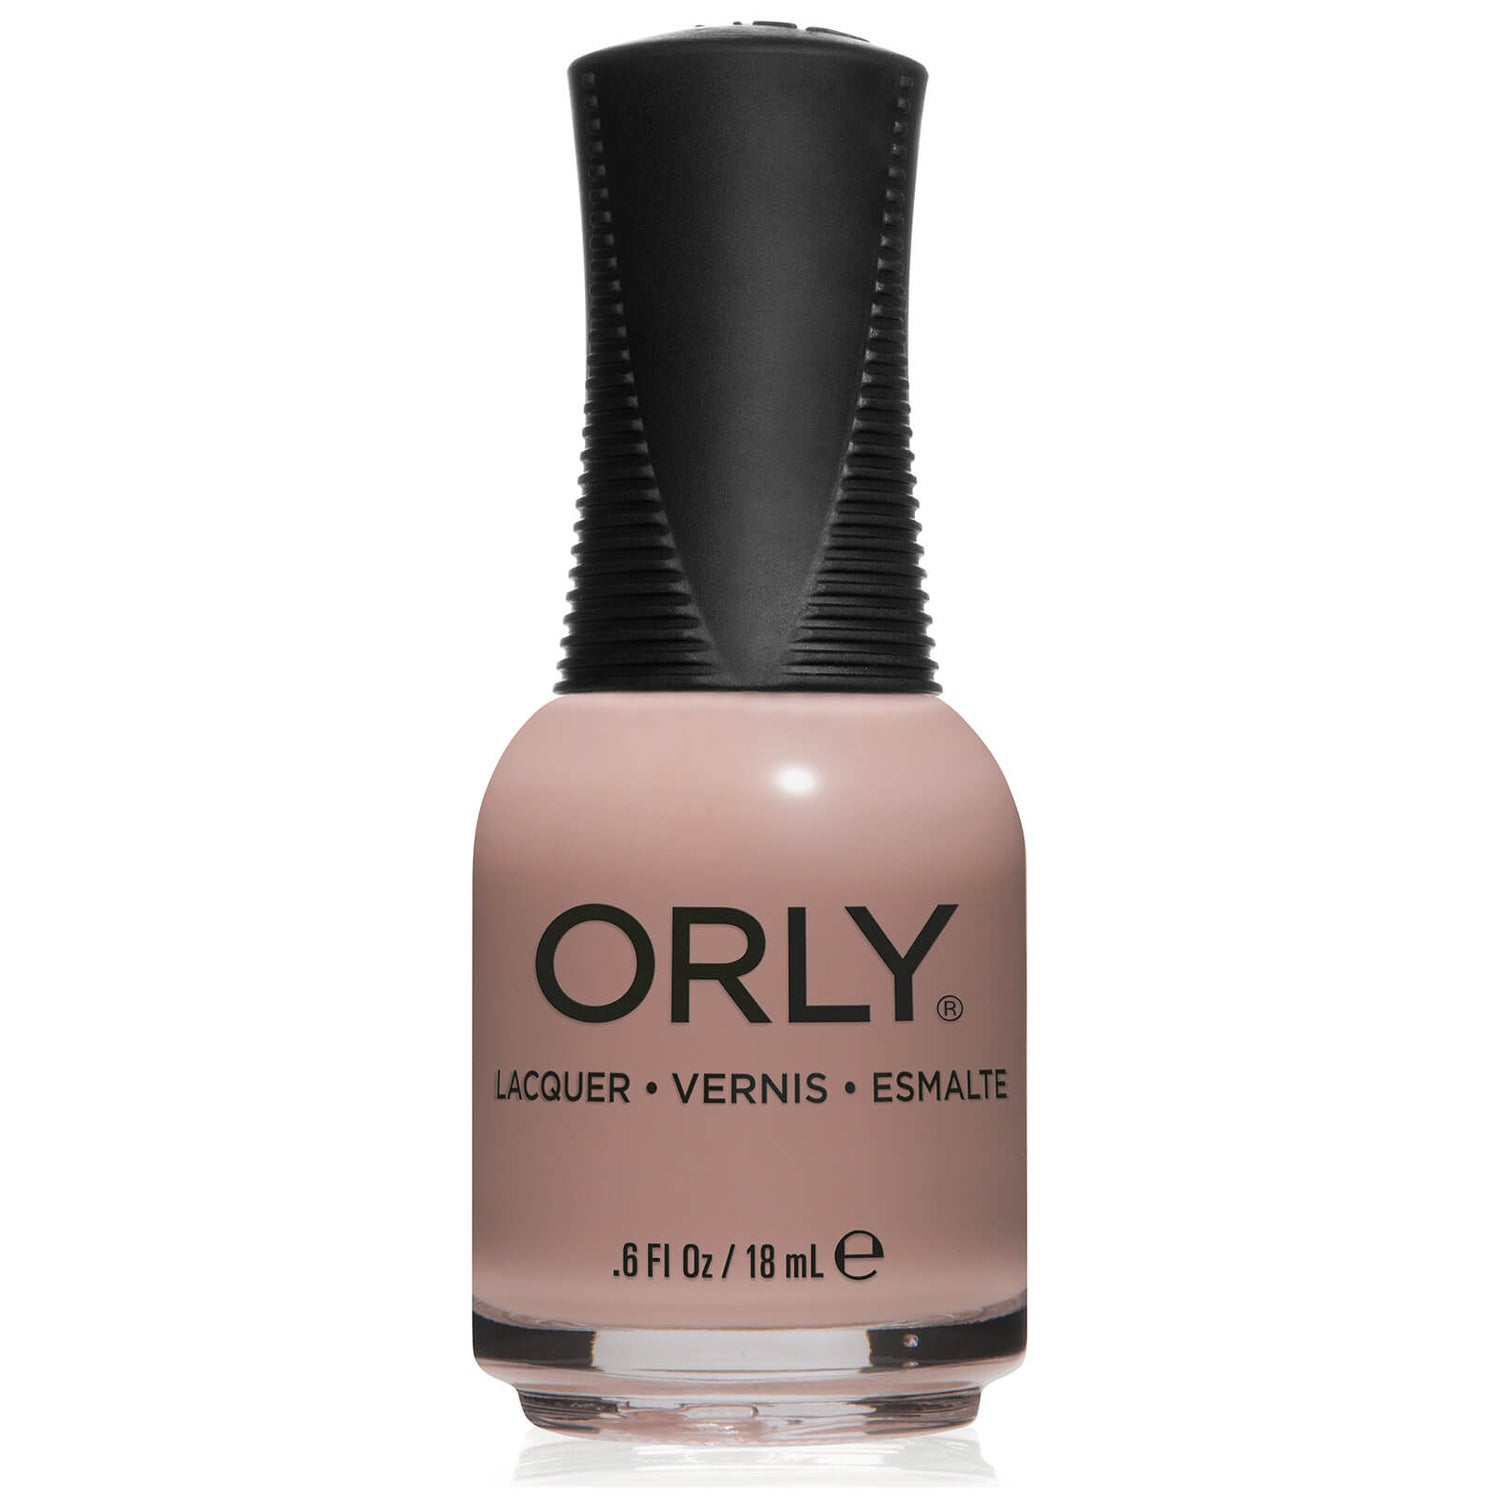 ORLY The New Neutral Collection Nail Varnish - Snuggle Up 18ml